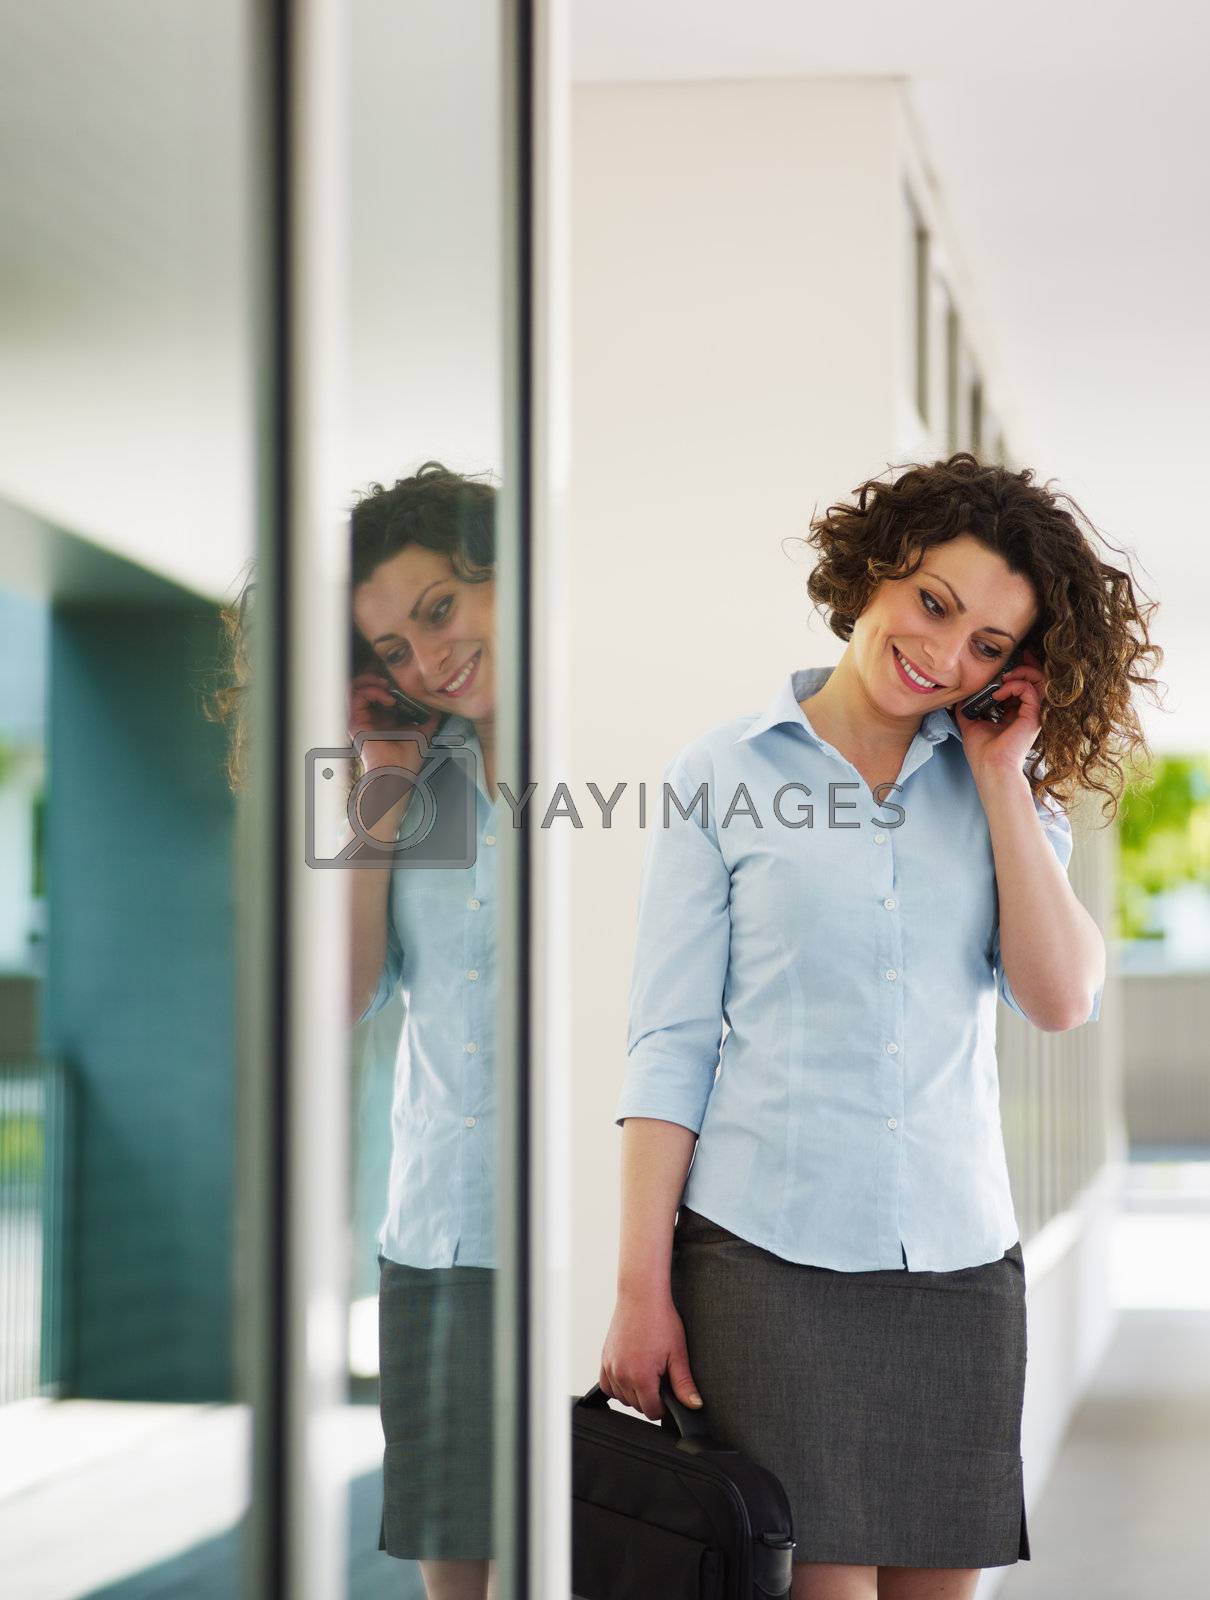 Royalty free image of mid adult businesswoman on the phone by diego_cervo